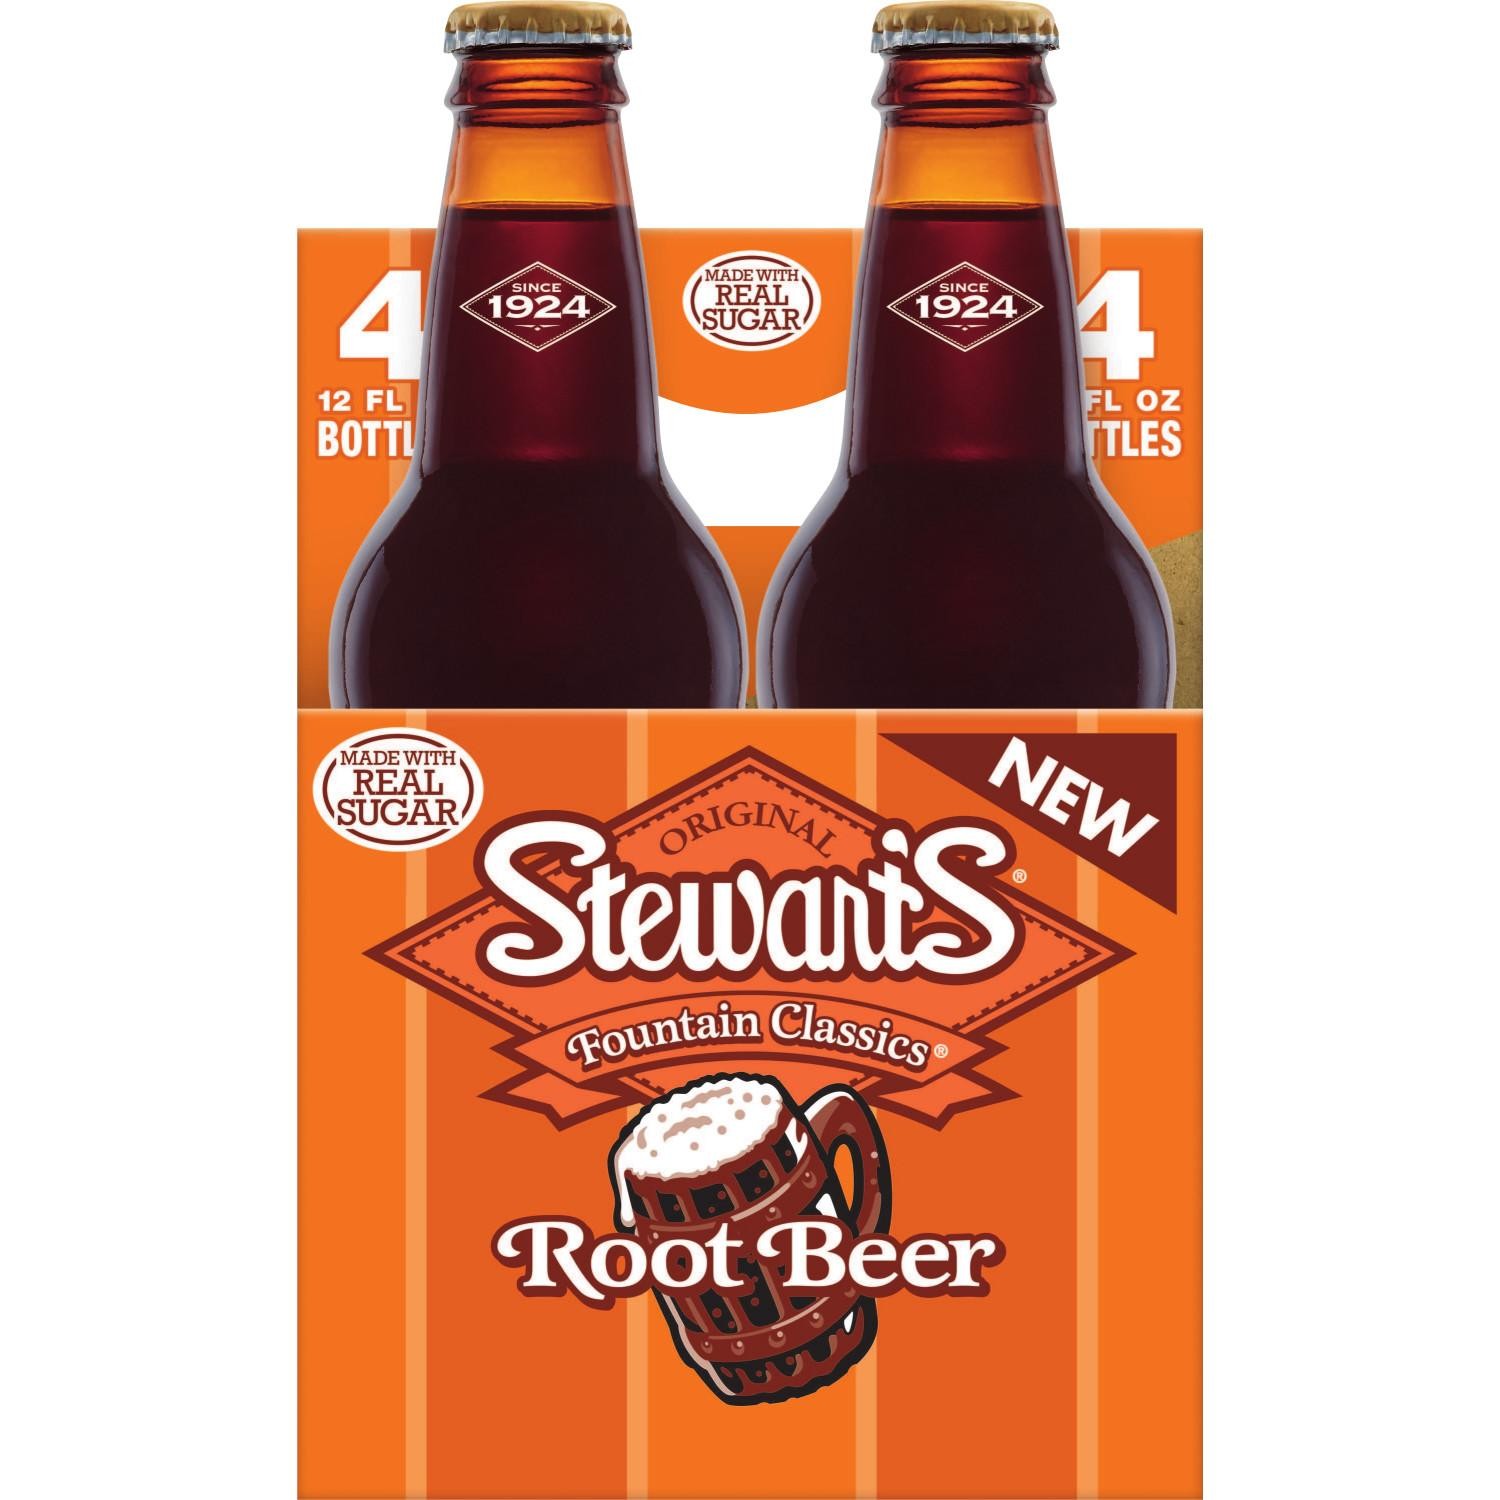 Stewart's Root Beer Made with Sugar